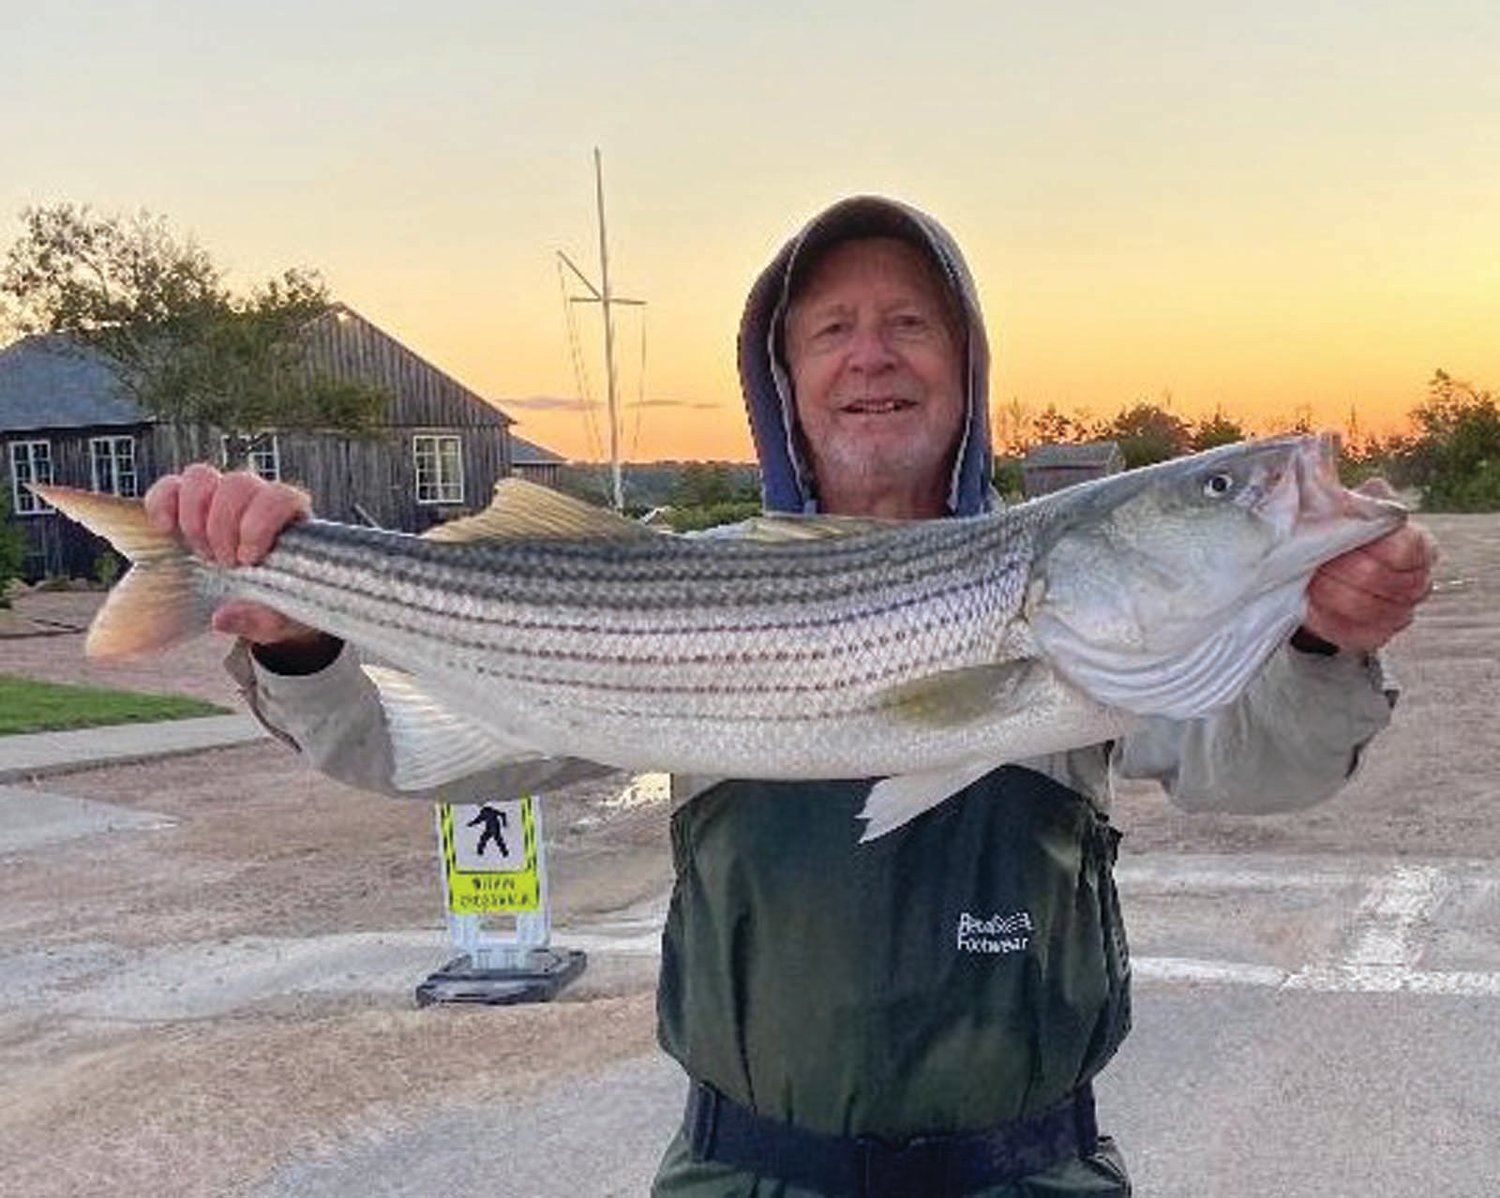 GOOD STRIPER BITE:  Gil Bell with a keeper striped bass said, “There was so much bait in the water so I decided not to match the hatch and used a six inch plug with success.”